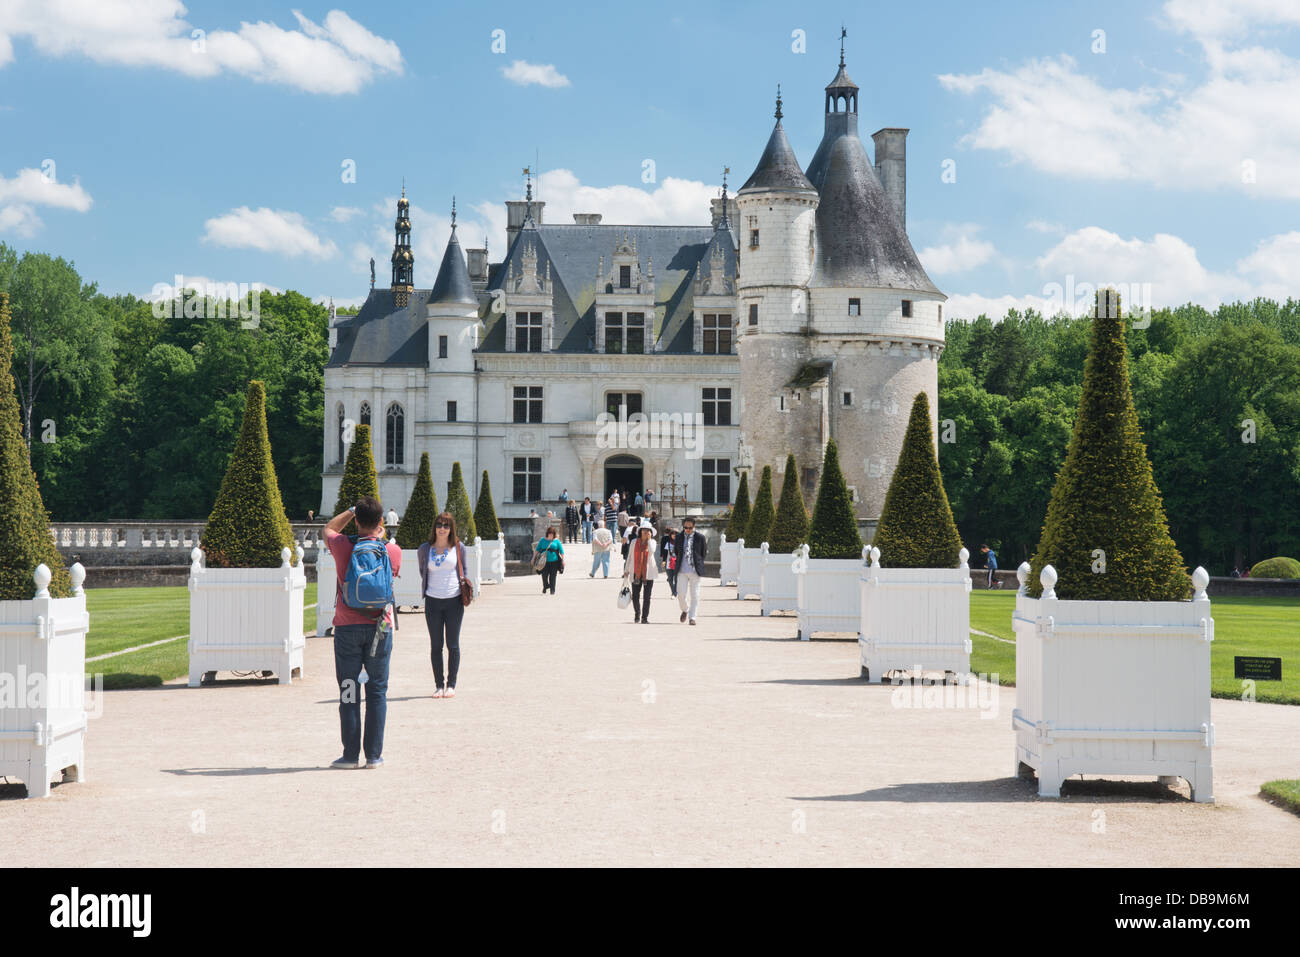 A landscape shot of tourists admiring Château Chenonceau in the Loire valley, France Stock Photo